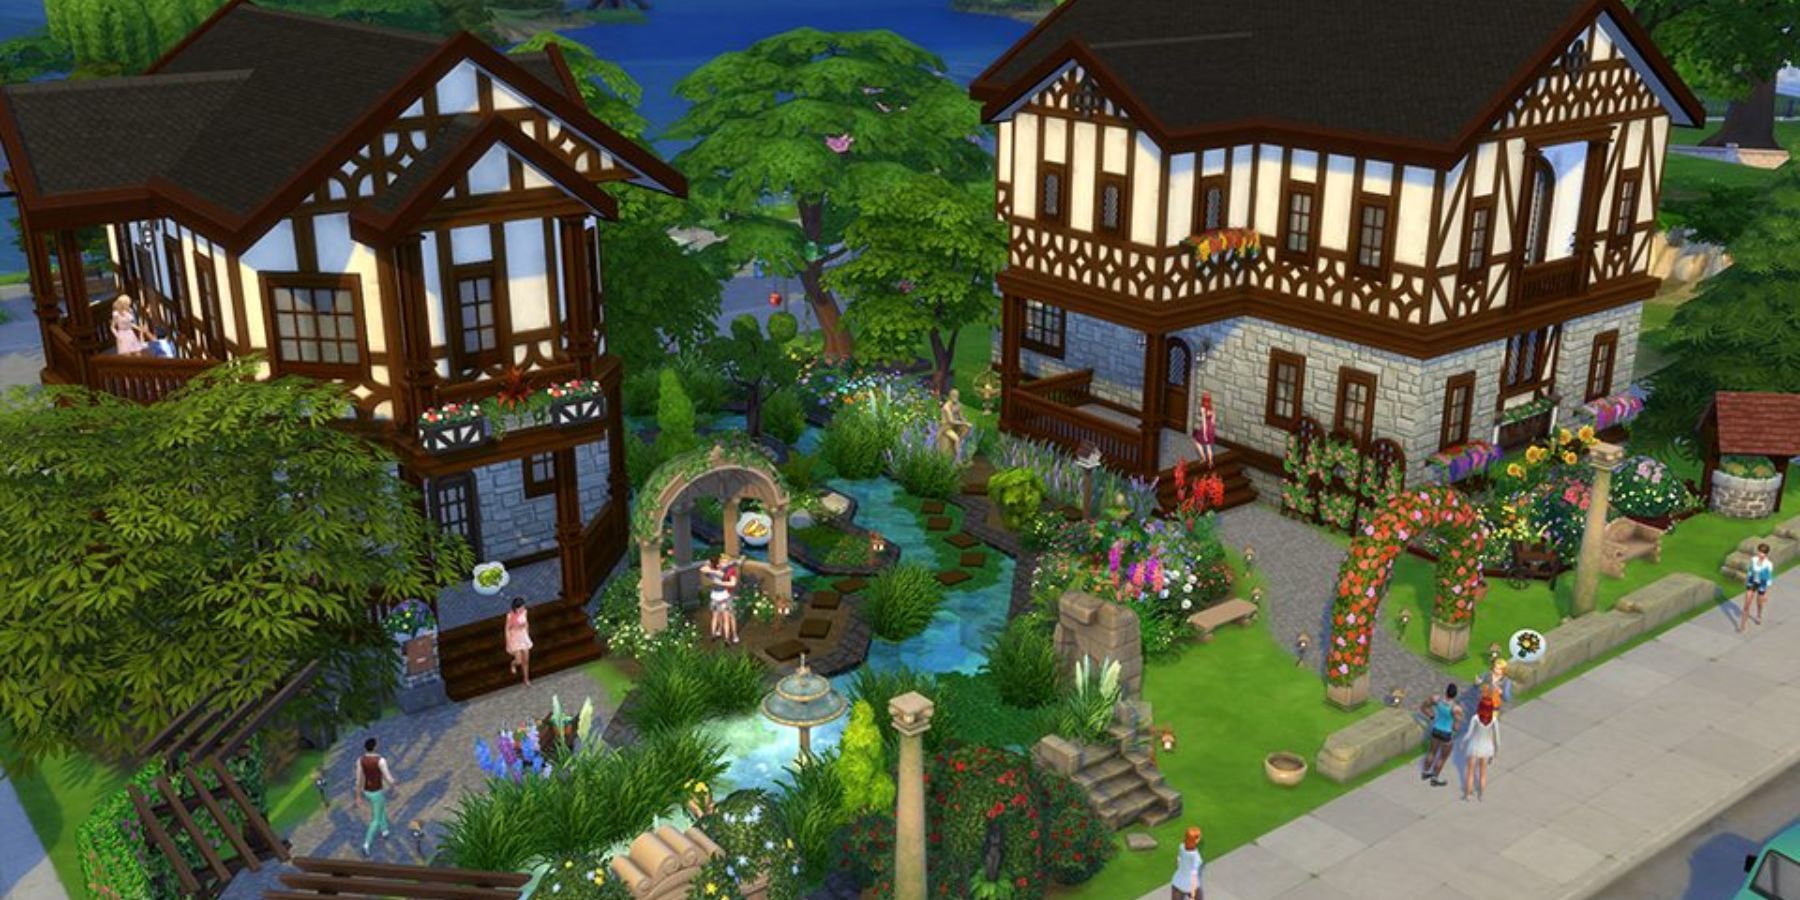 The Sims 4 House With Garden